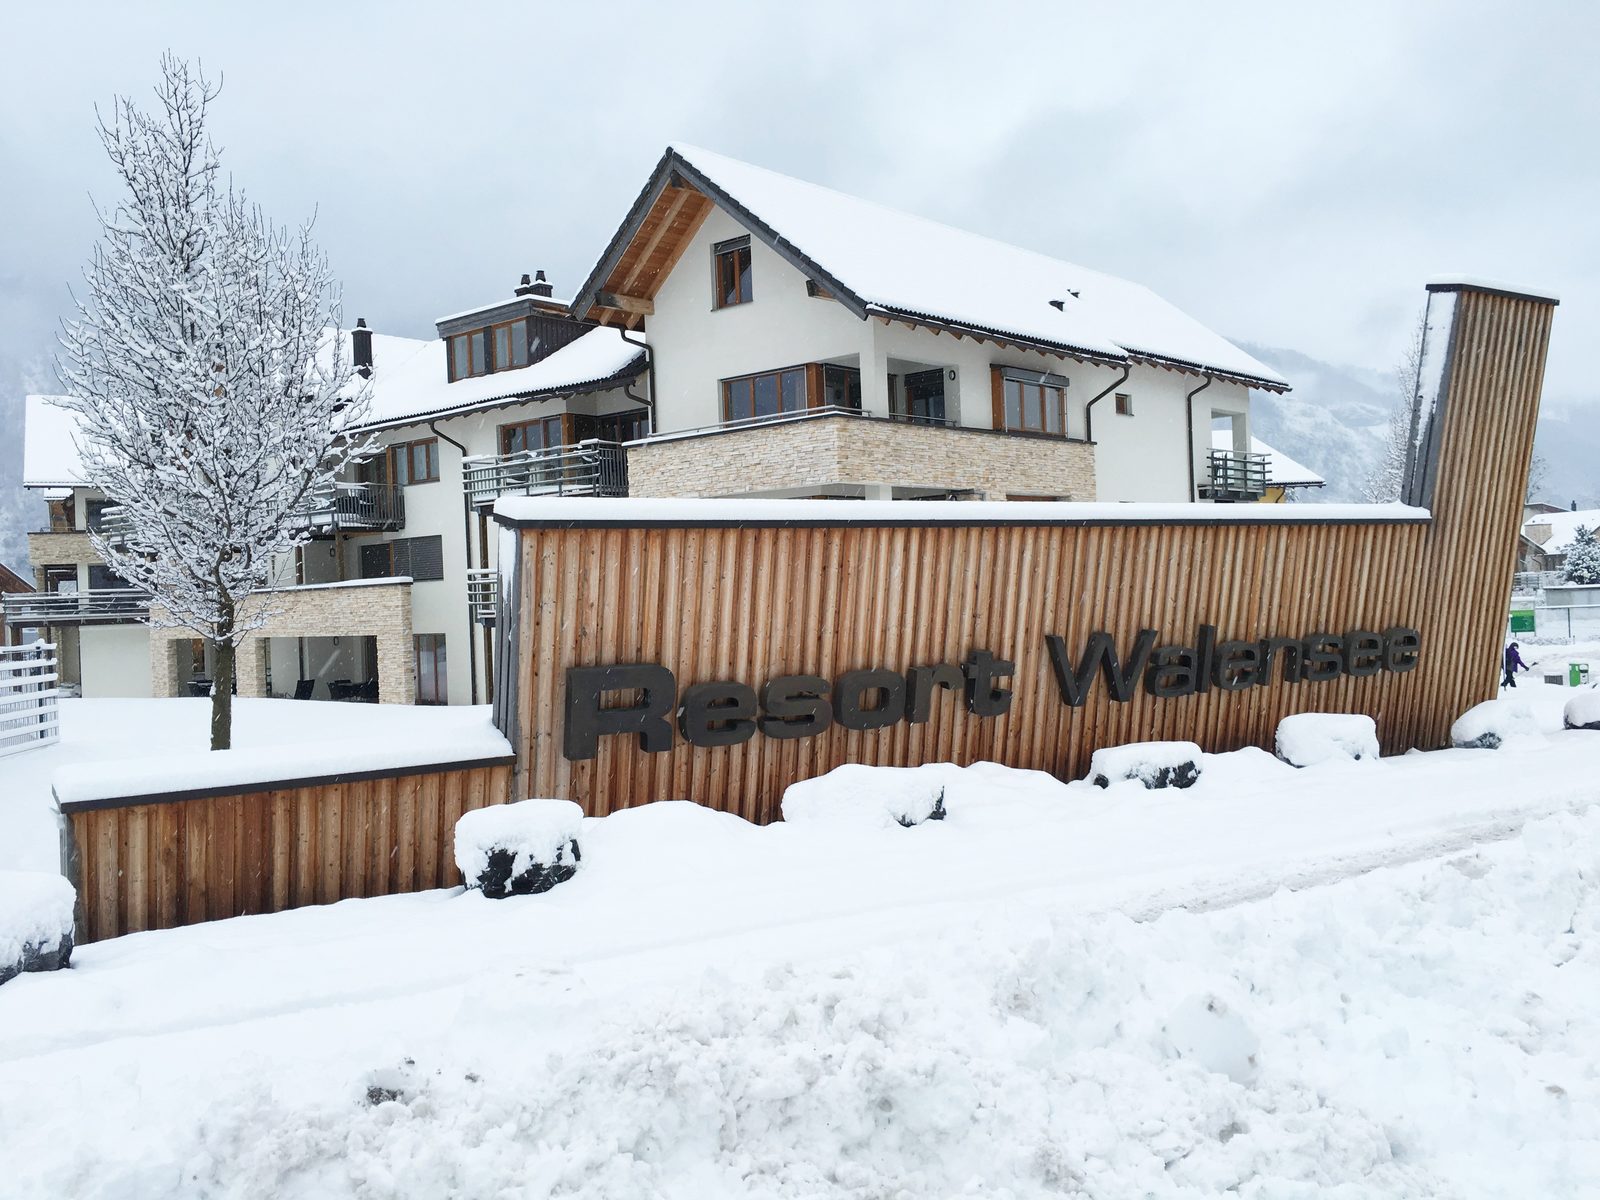 Resort Walensee, on the foot of the Flumserberg Switzerland, is the ideal winter sports location for the whole family.